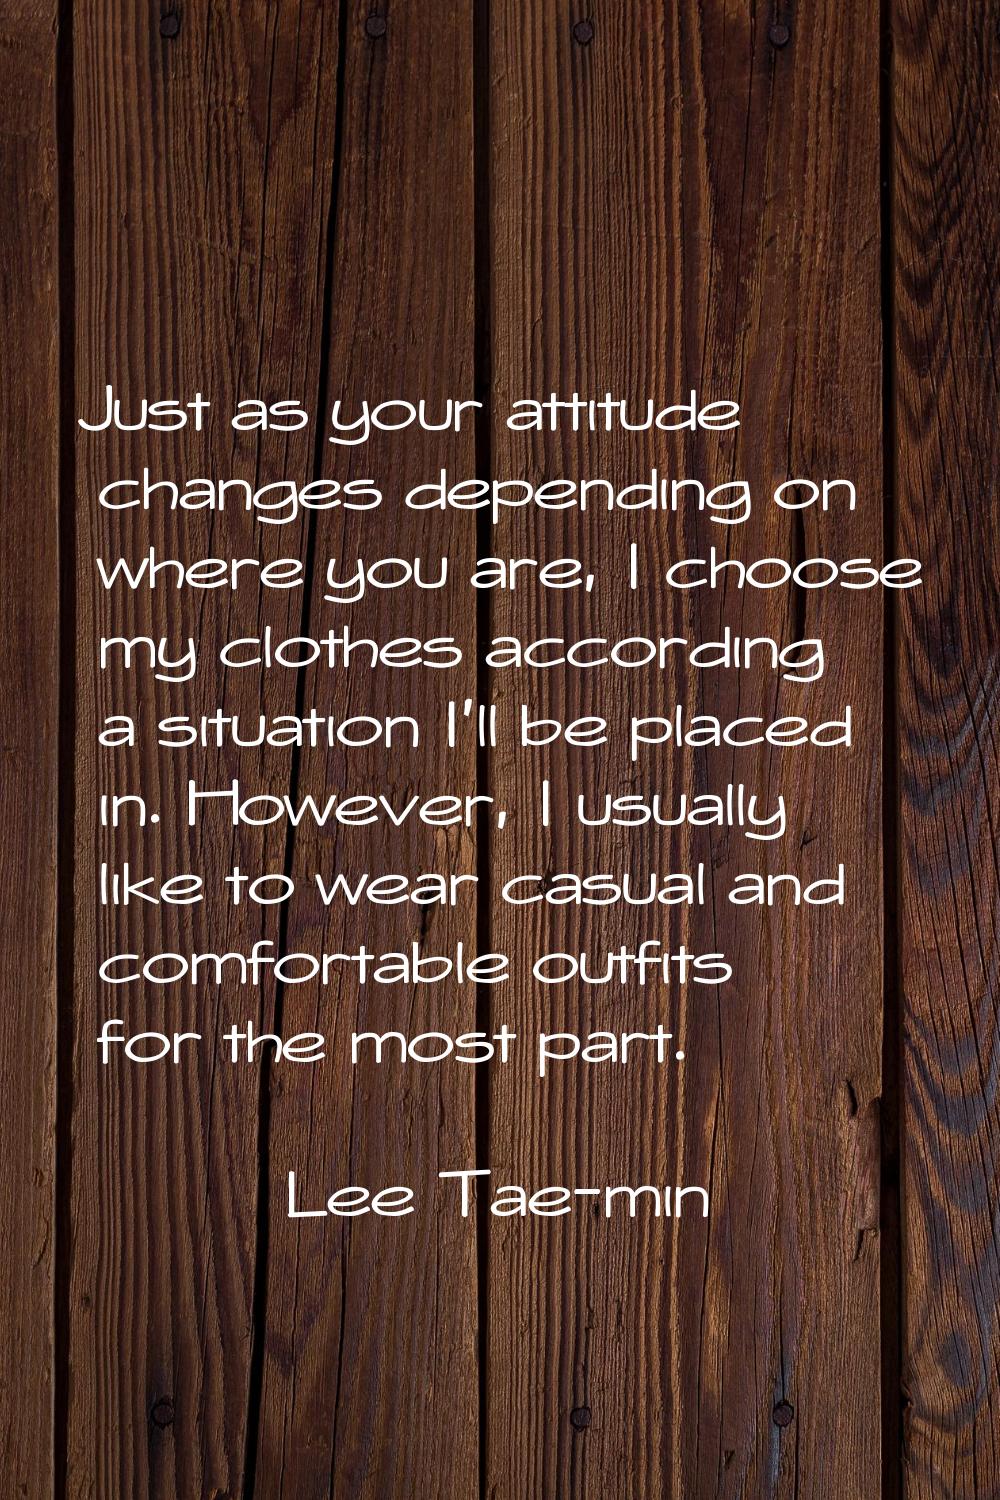 Just as your attitude changes depending on where you are, I choose my clothes according a situation